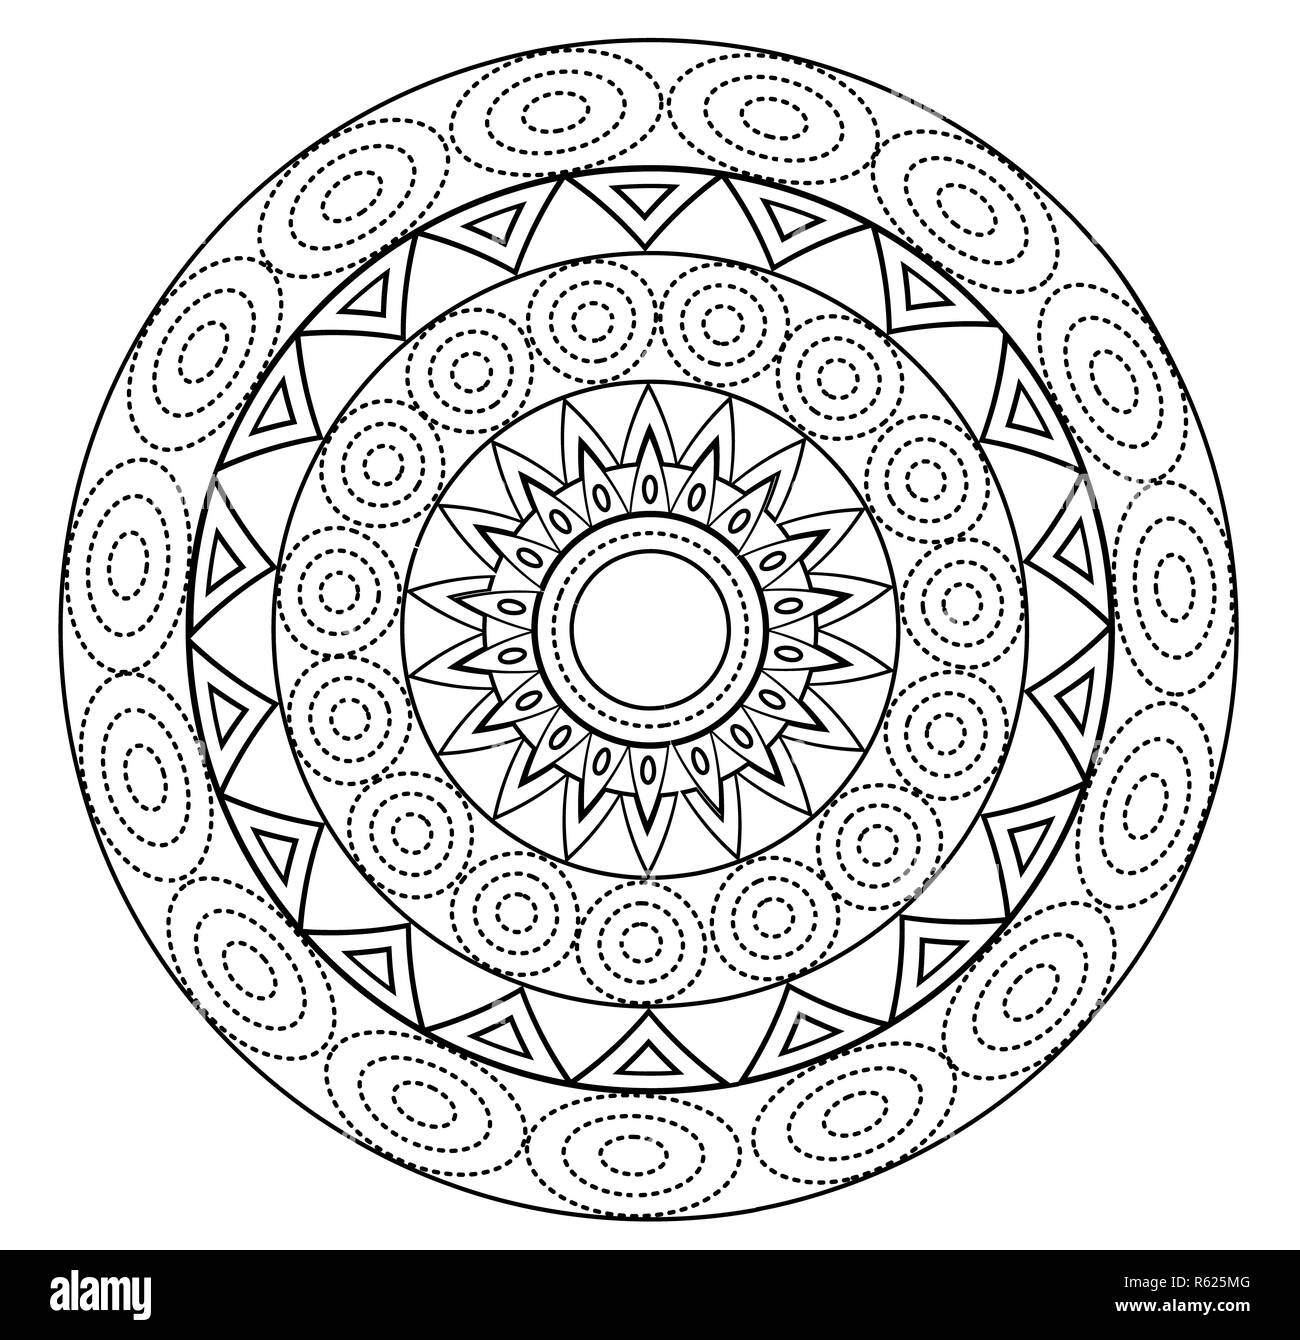 Mandalas for coloring book. Decorative black and white round outline ornament. Unusual flower shape. Oriental vector and anti-stress therapy patterns Stock Photo